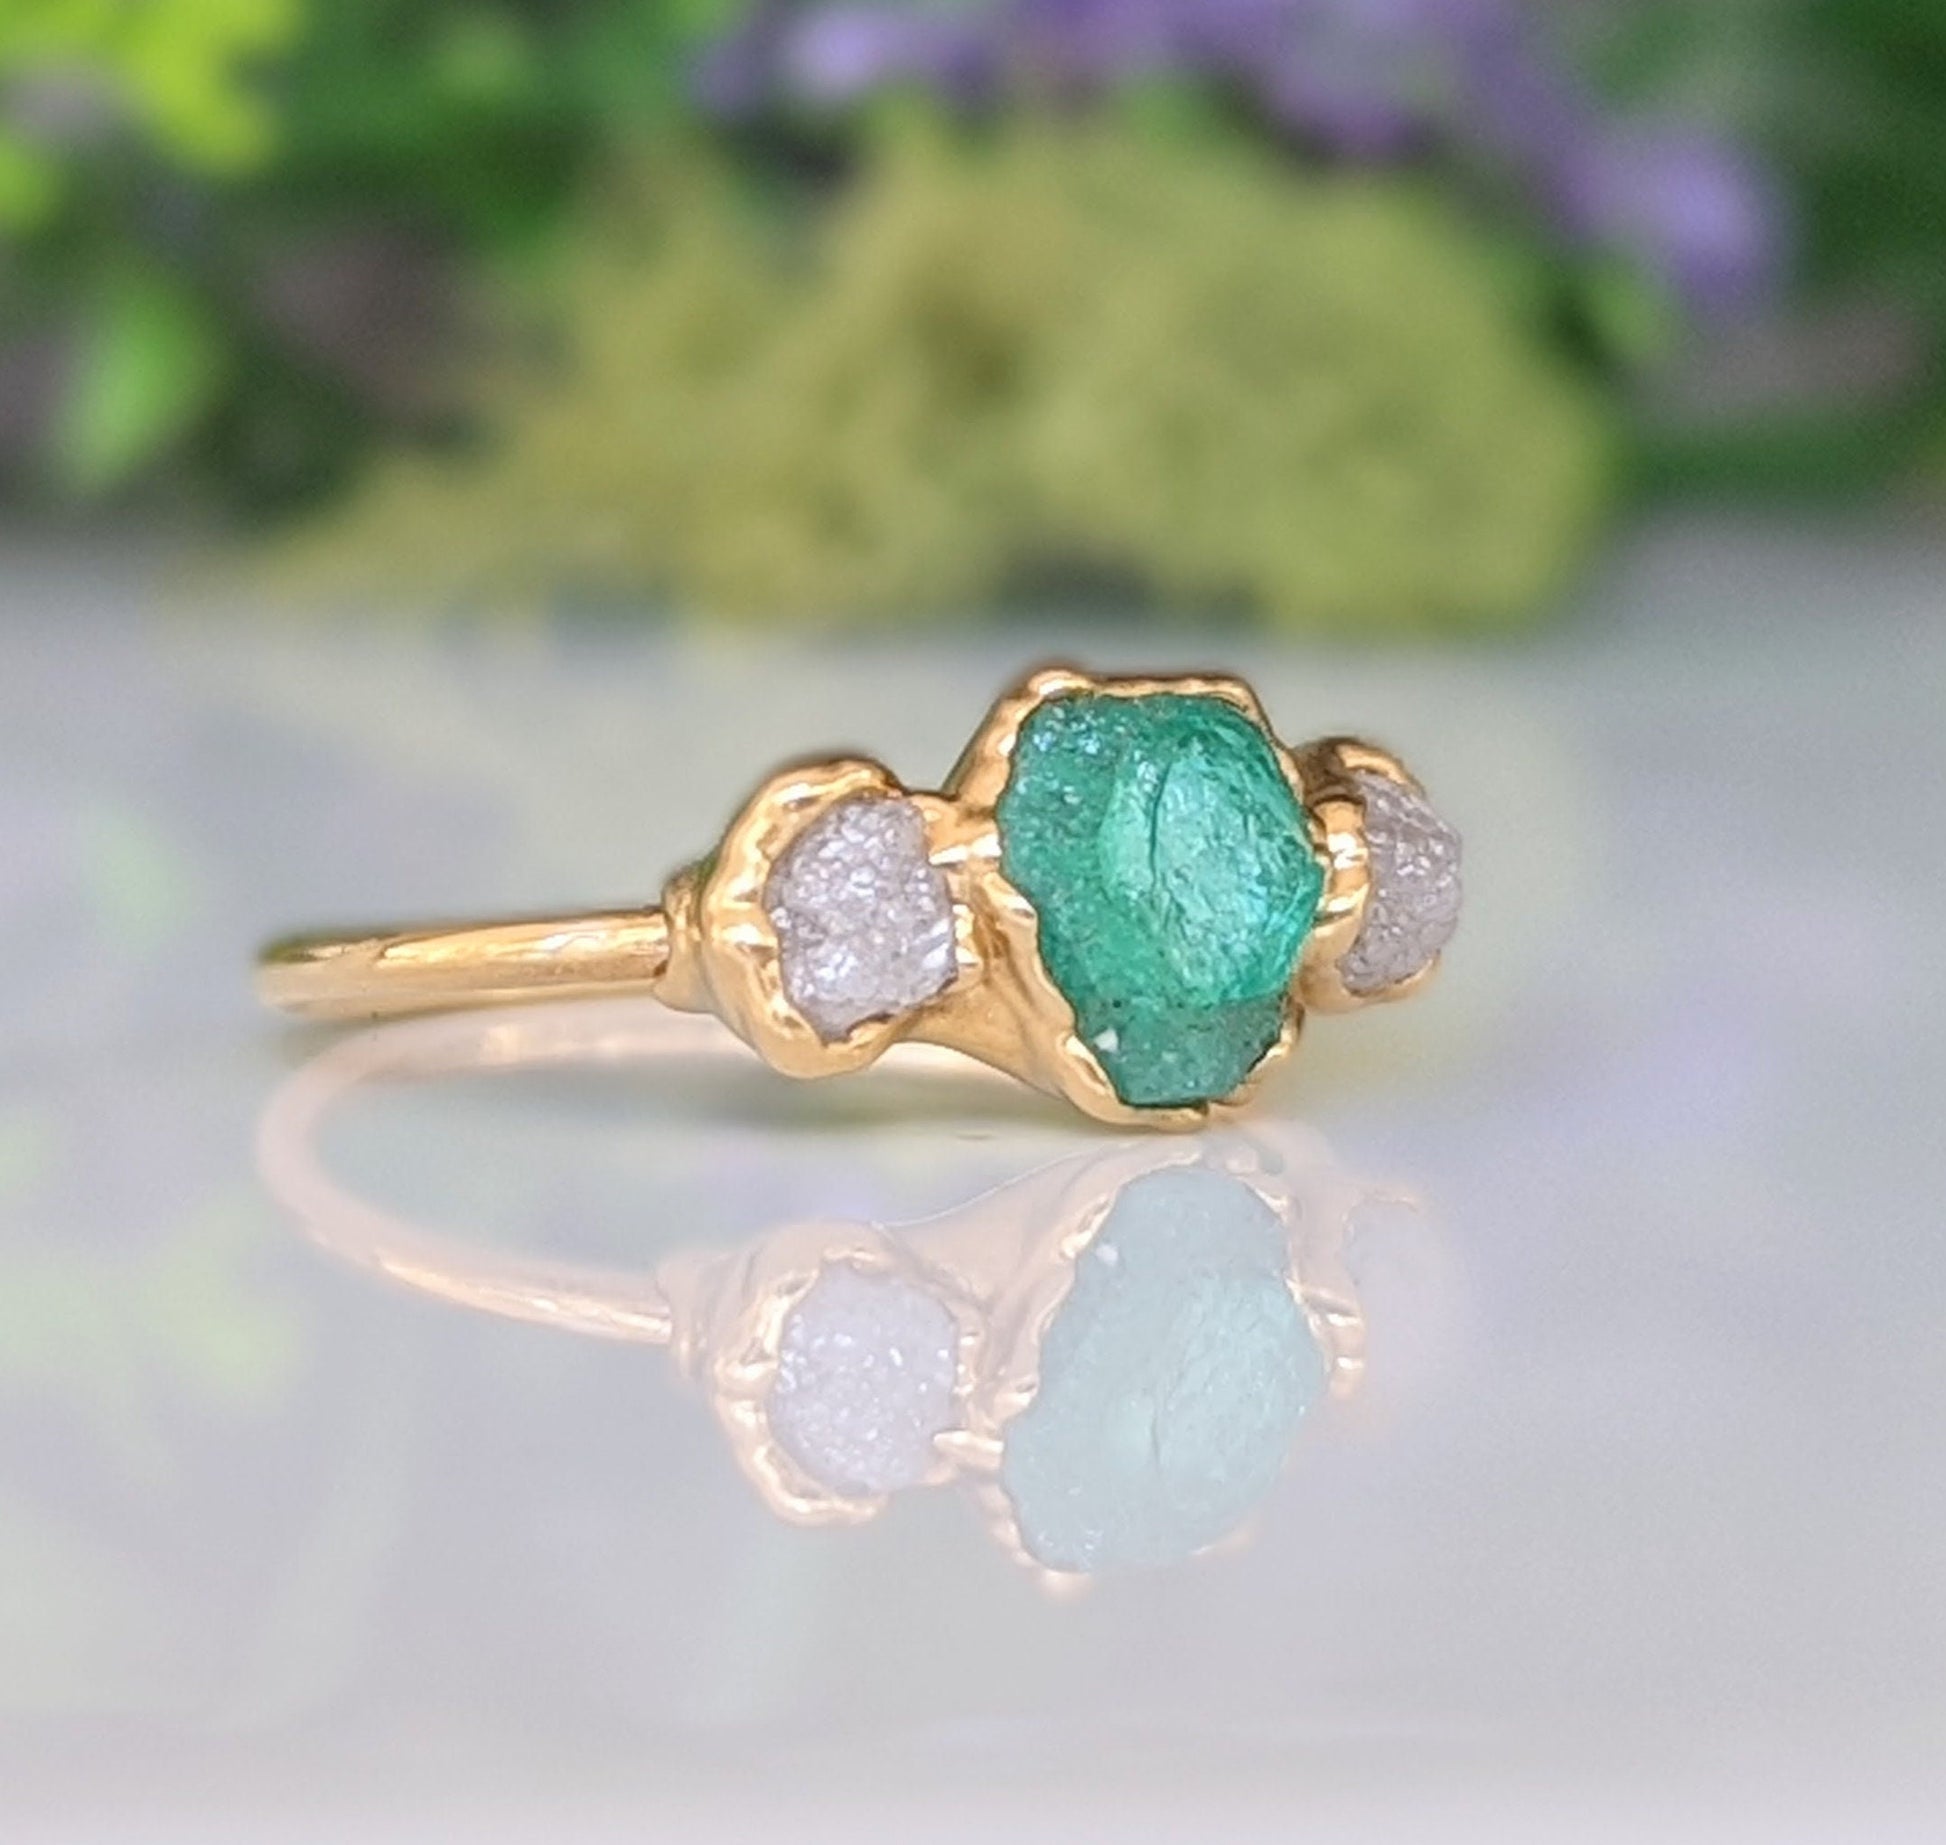 Raw Emerald and rough uncut diamond engagement ring in 18k Gold